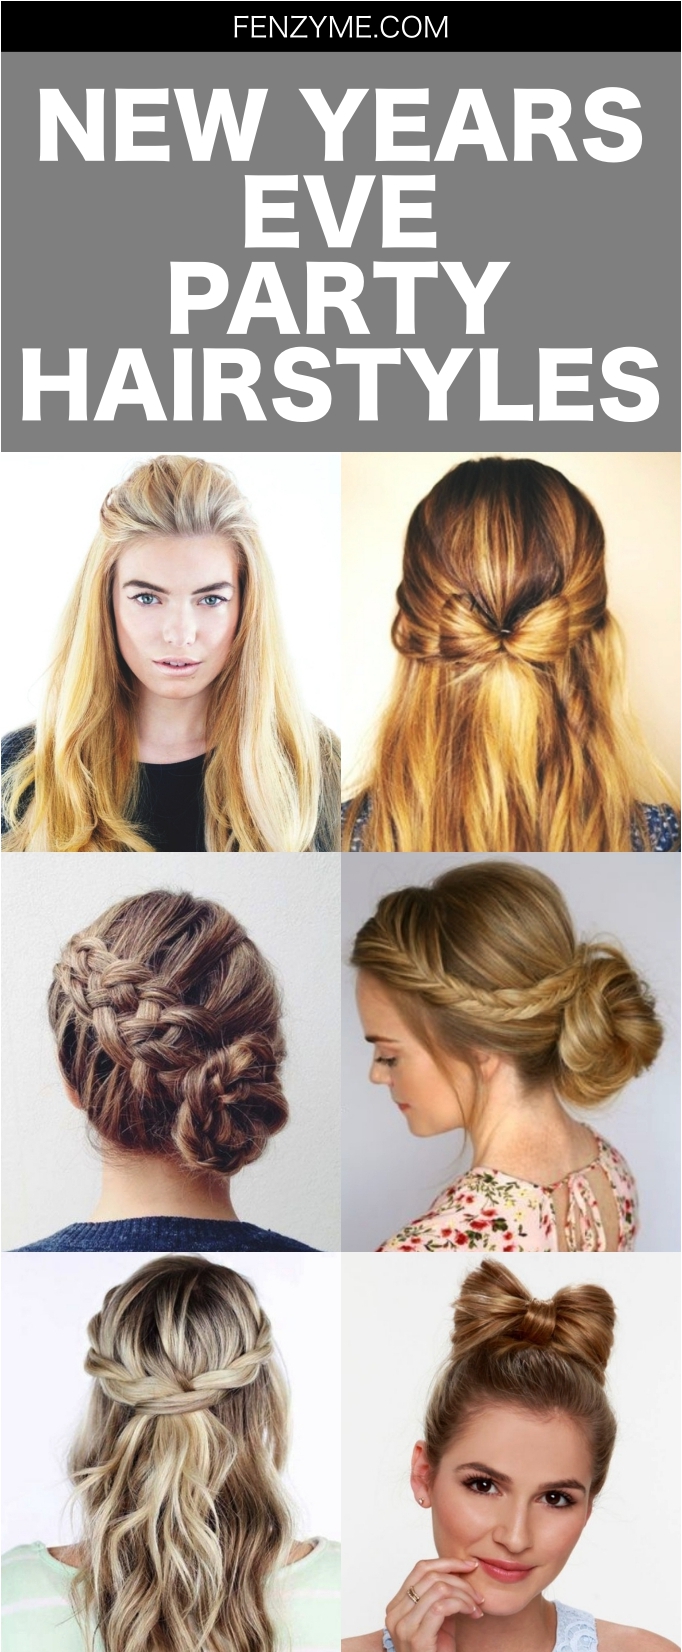 New Years Eve Party Hairstyles